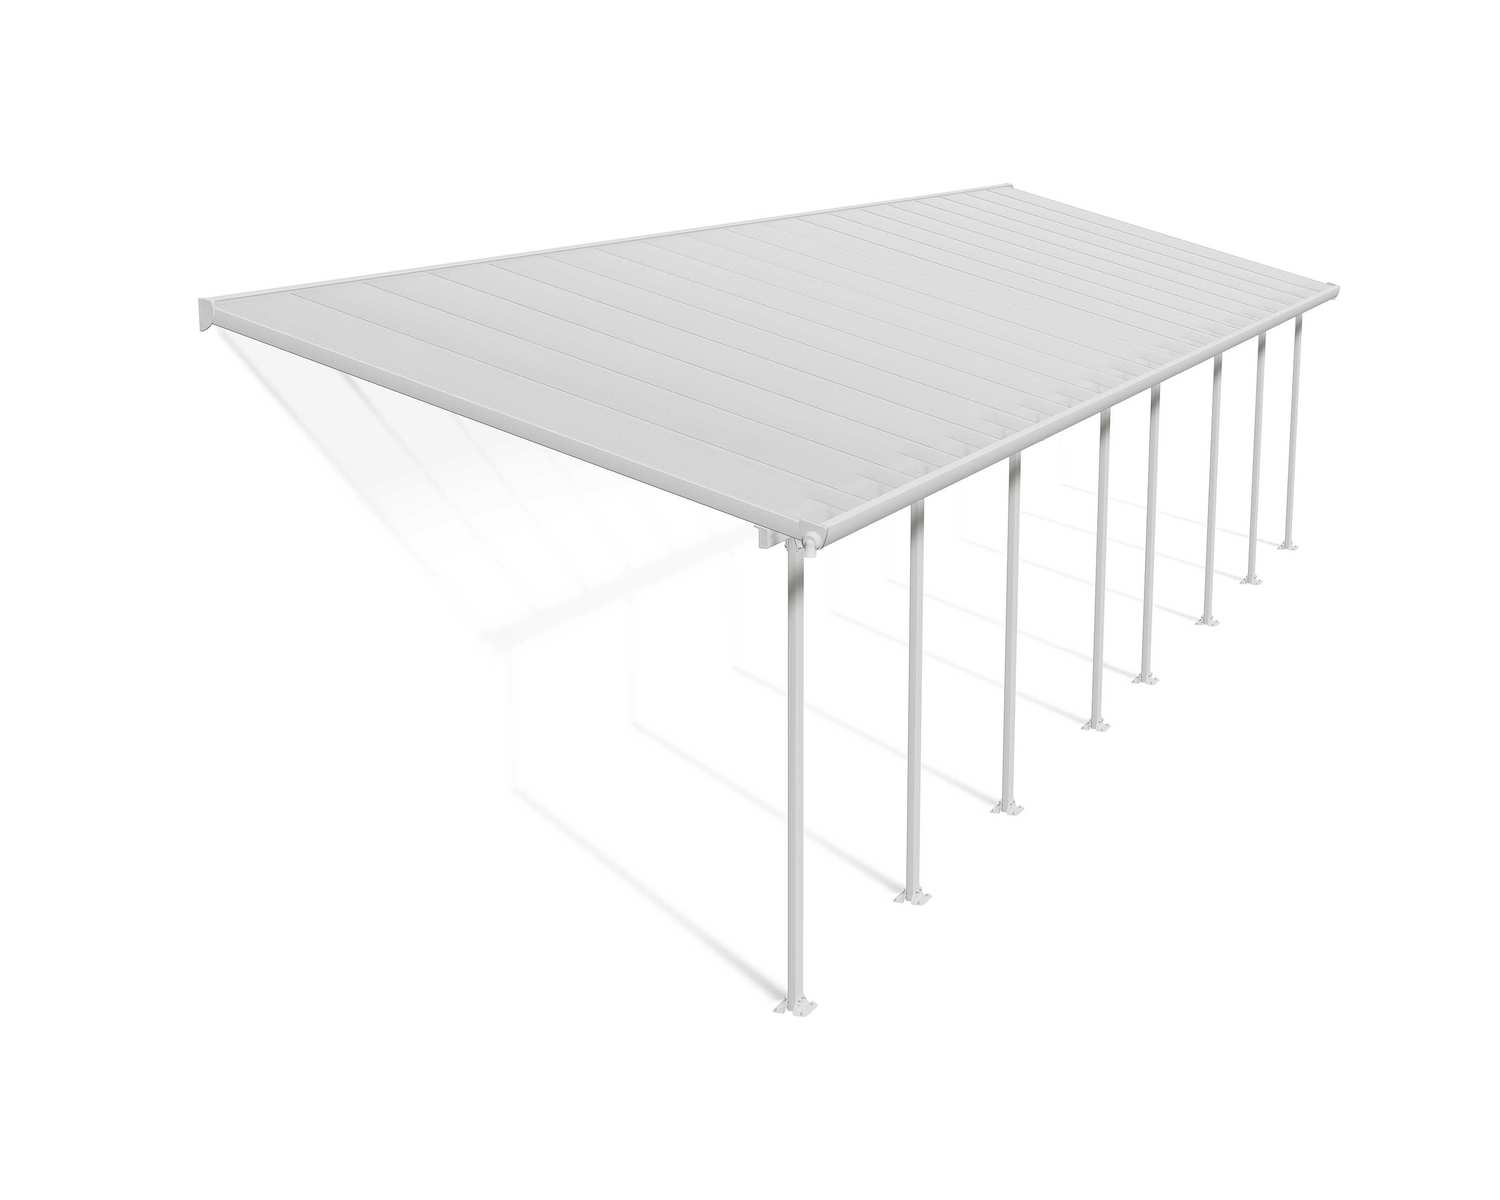 Patio Cover Kit Feria 3 ft. x 10.35 ft. White Structure &amp; Clear Multi Wall Glazing